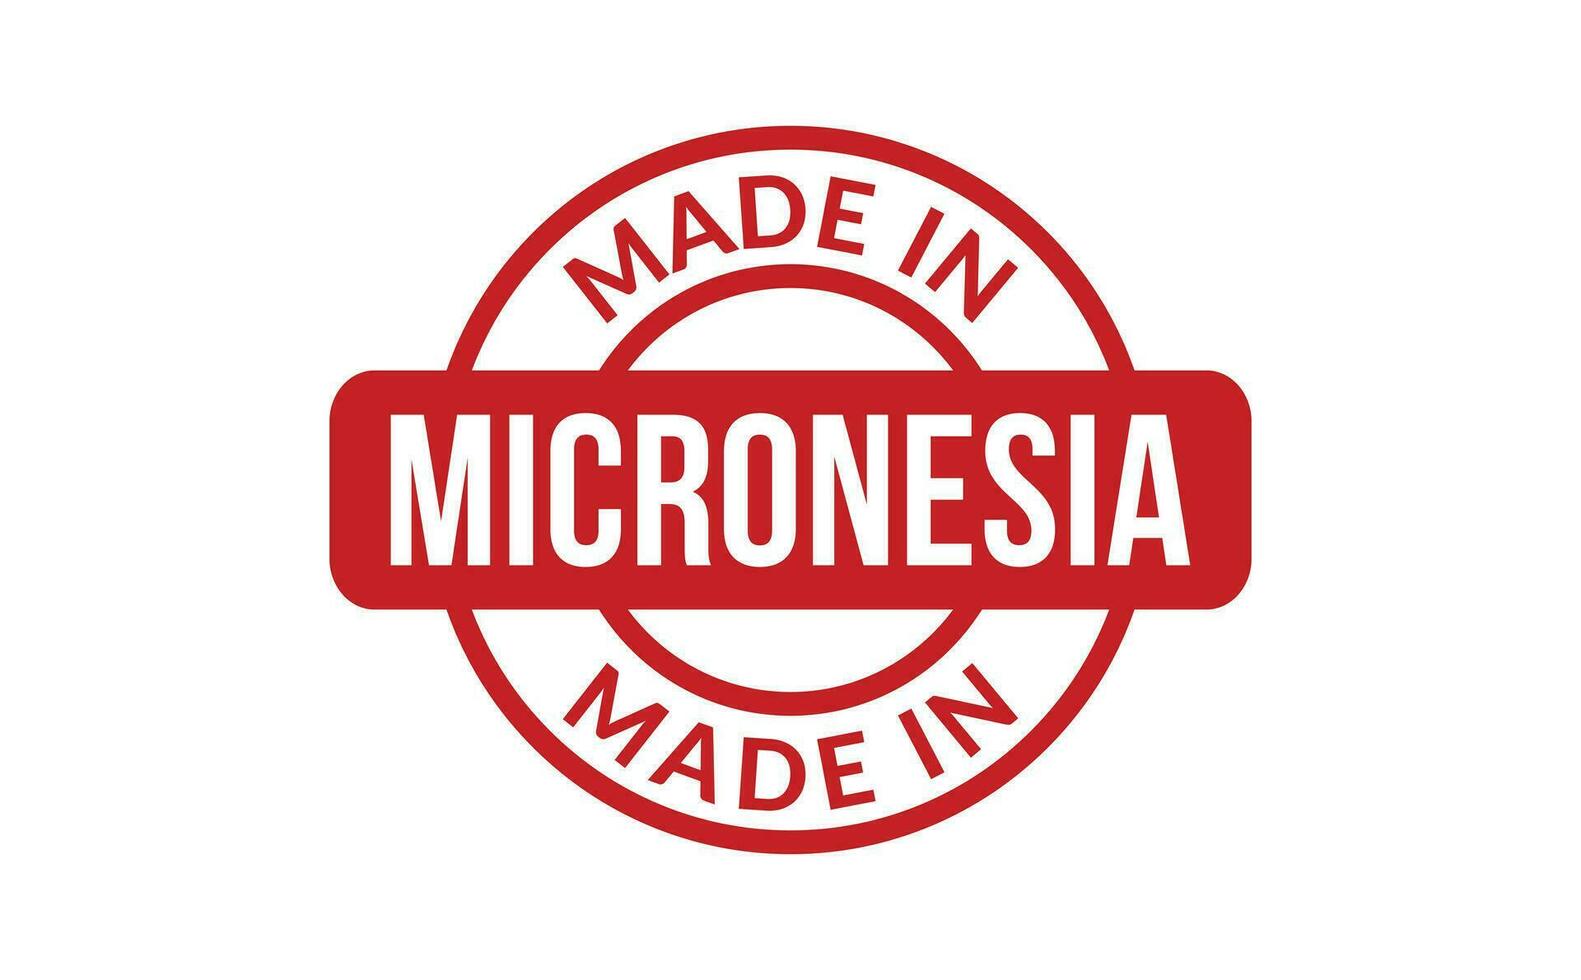 Made In Micronesia Rubber Stamp vector